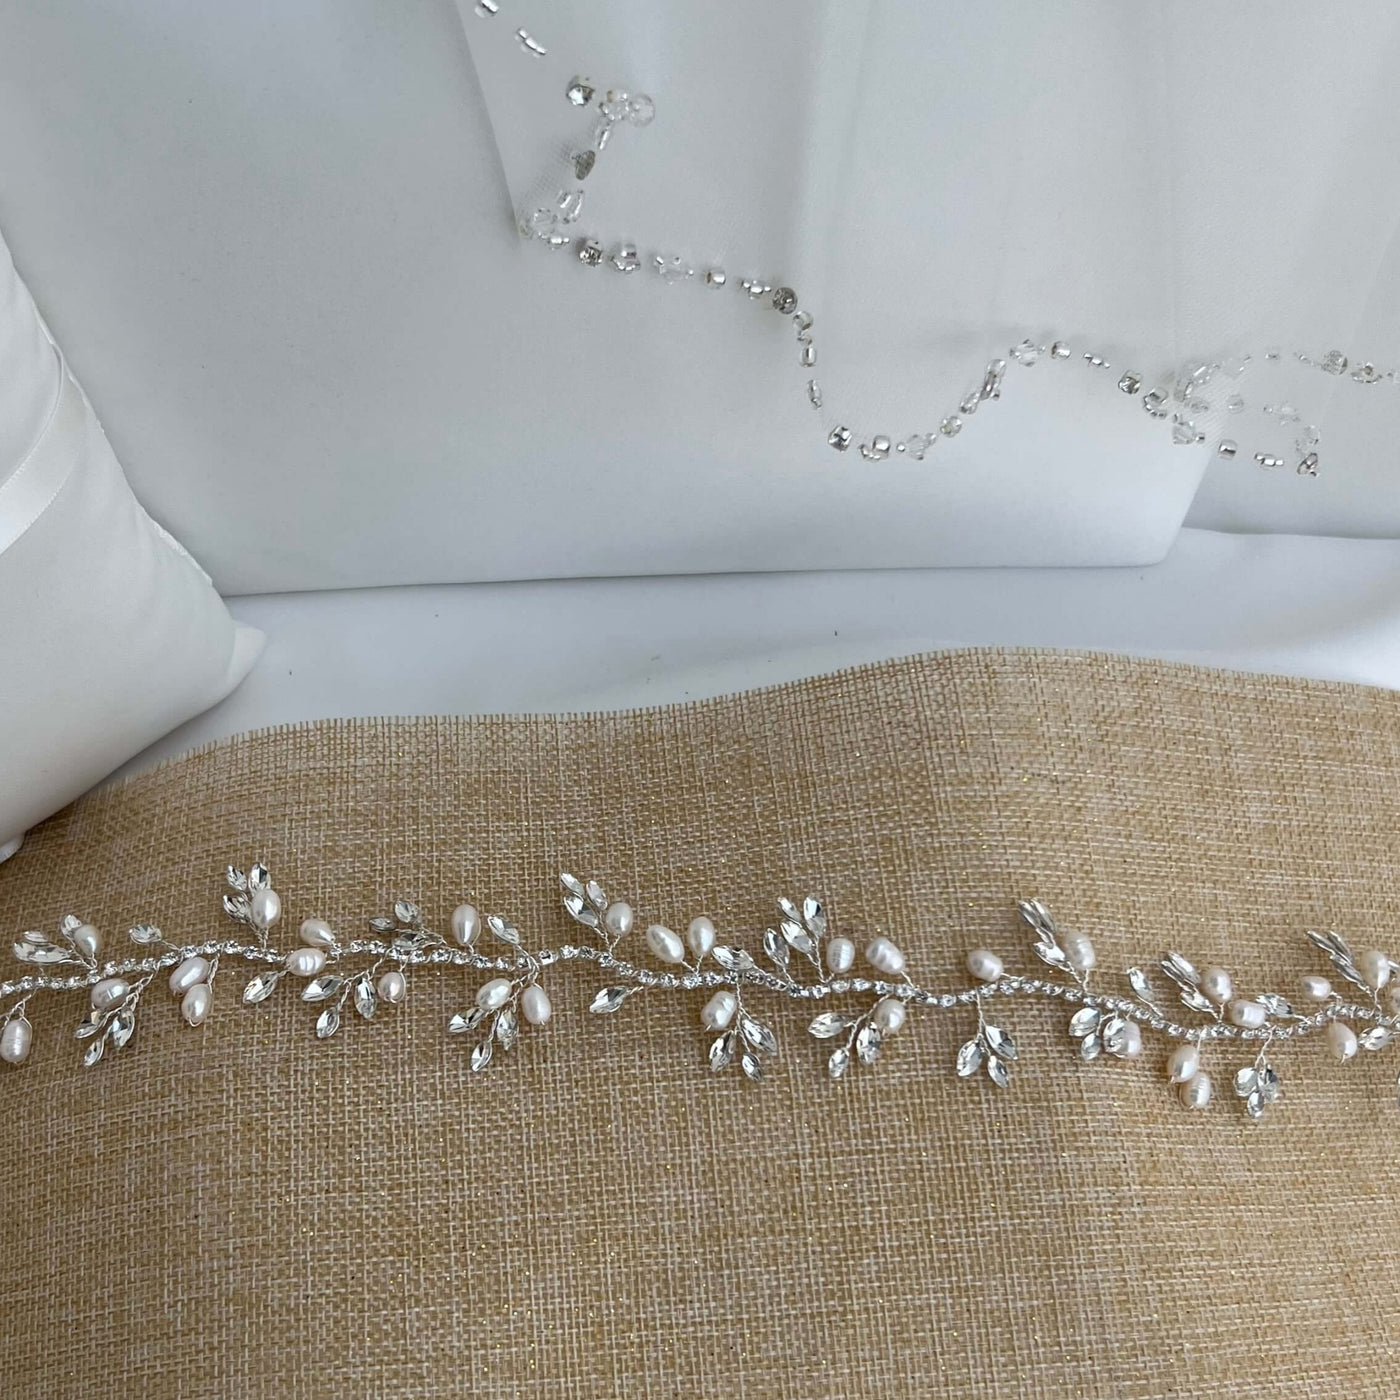 This beautiful wedding hair vine adds a romantic flair to any bridal hairstyle. Crafted with high quality pearls and rhinestones, it sparkles brilliantly to make your special day unforgettable.